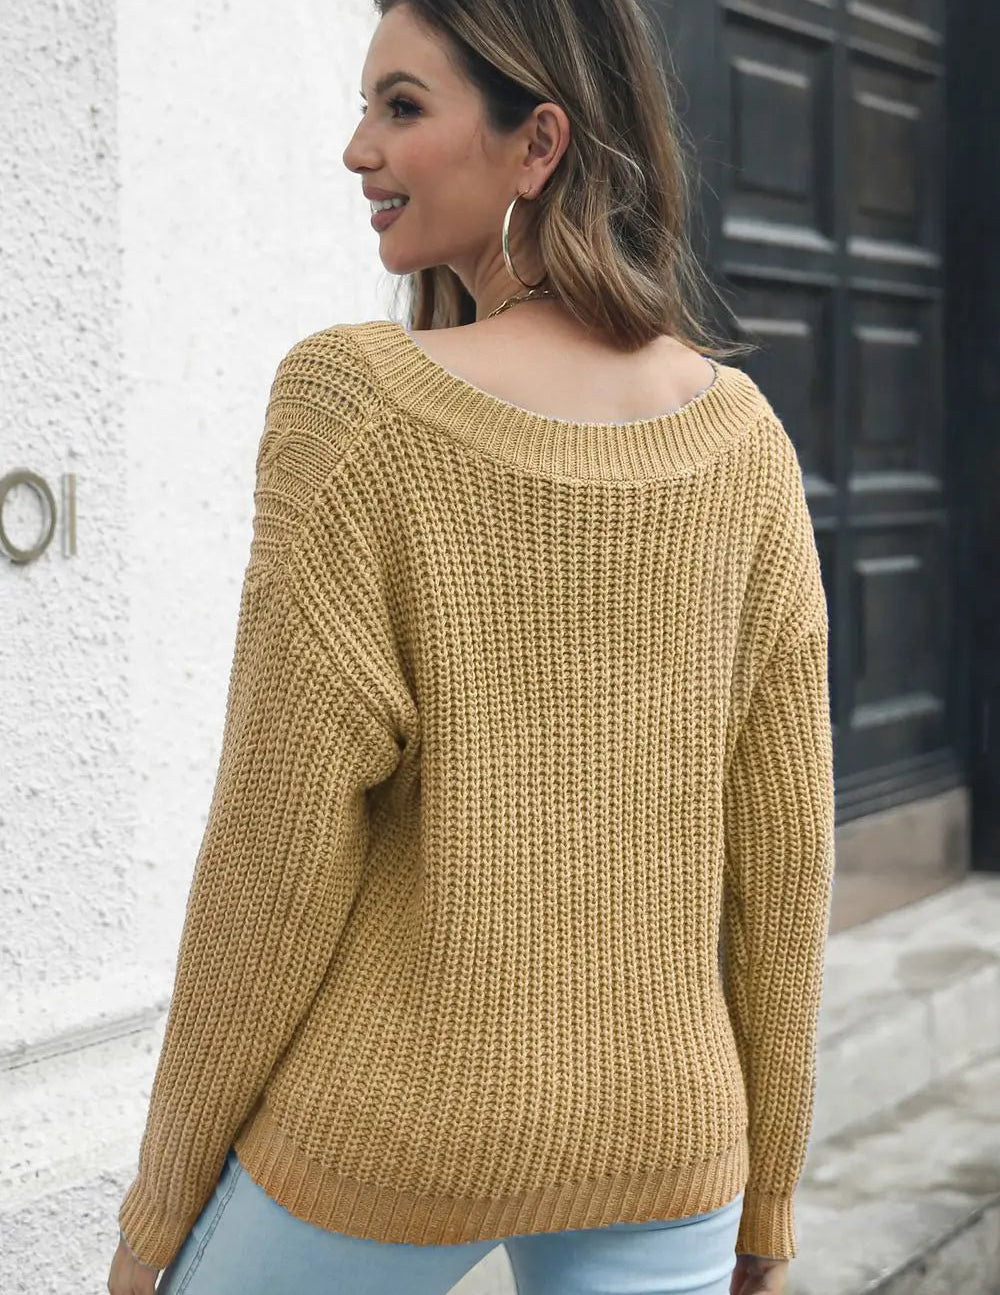 V NECK CABLE KNIT SWEATER - MeadeuxV NECK CABLE KNIT SWEATERSweaterMeadeux